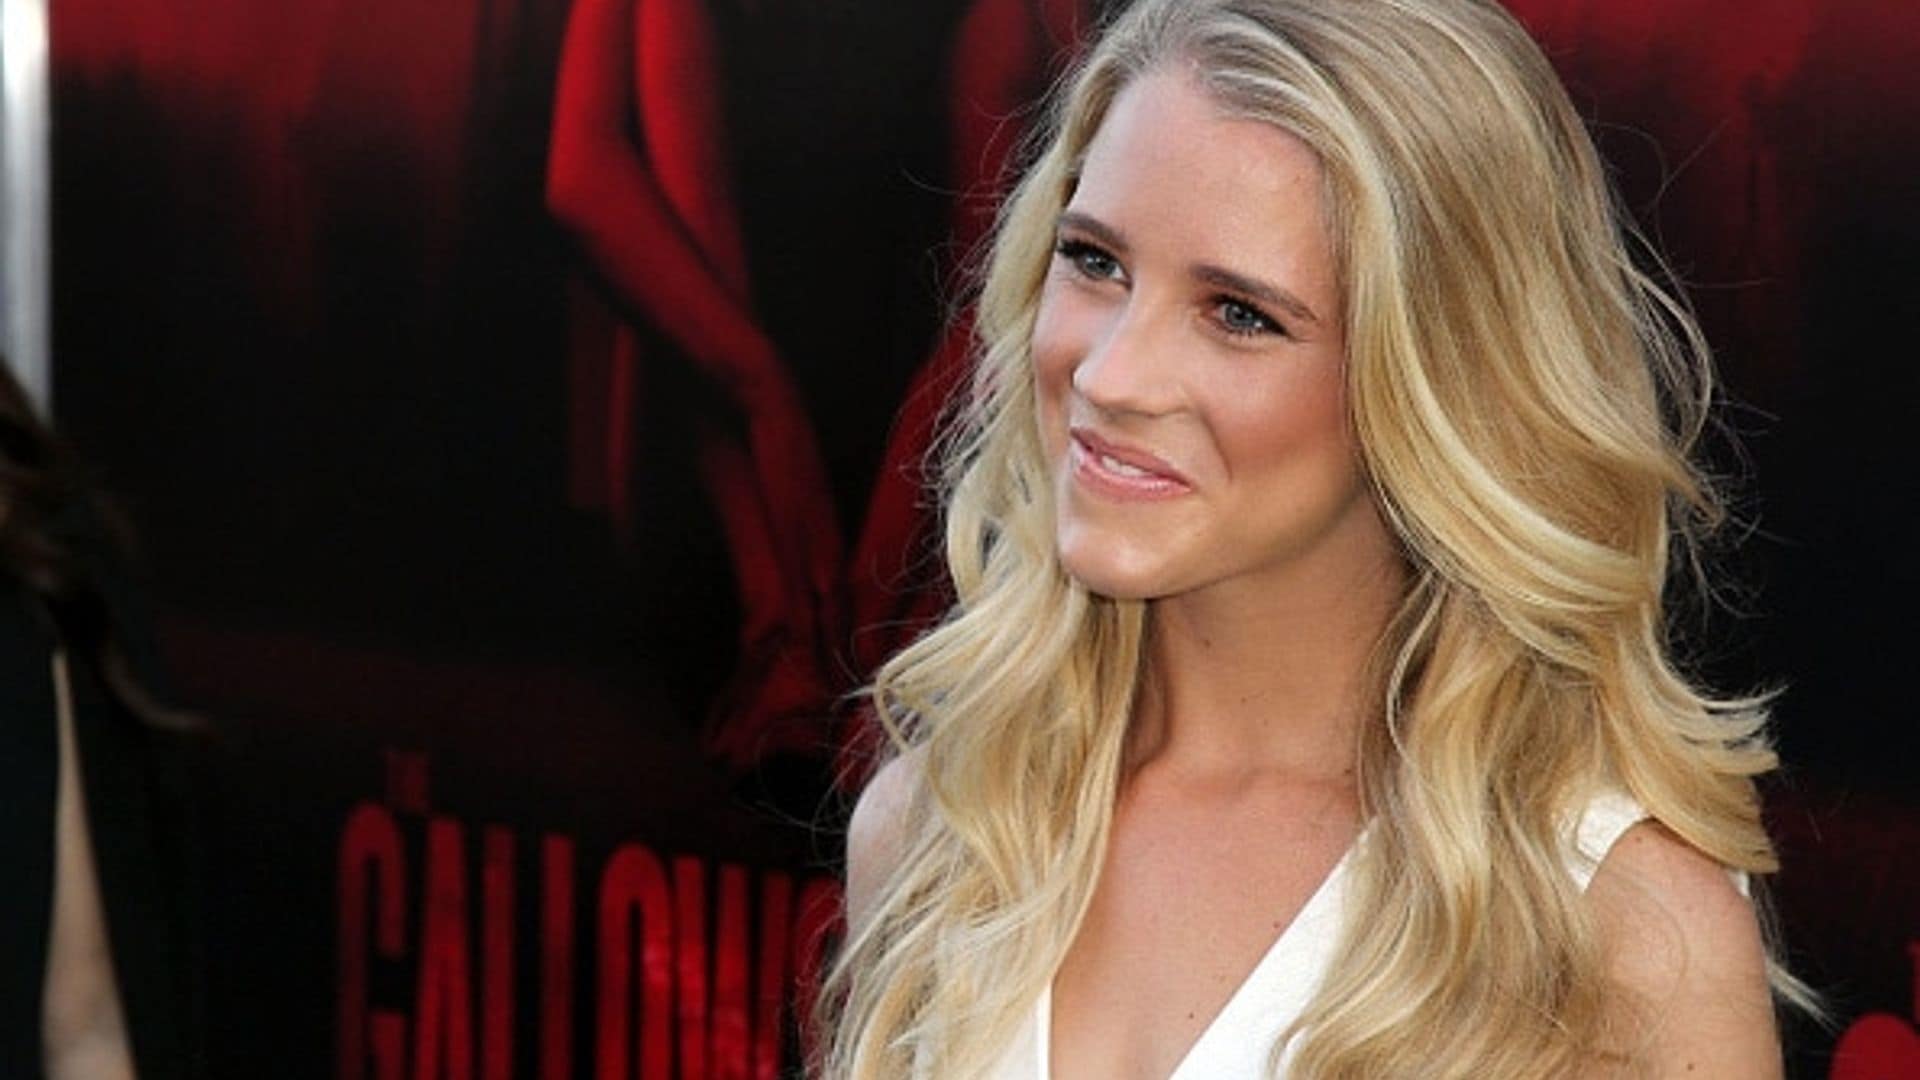 Cassidy Gifford pays tribute to father Frank Gifford: 'I lost my best friend'